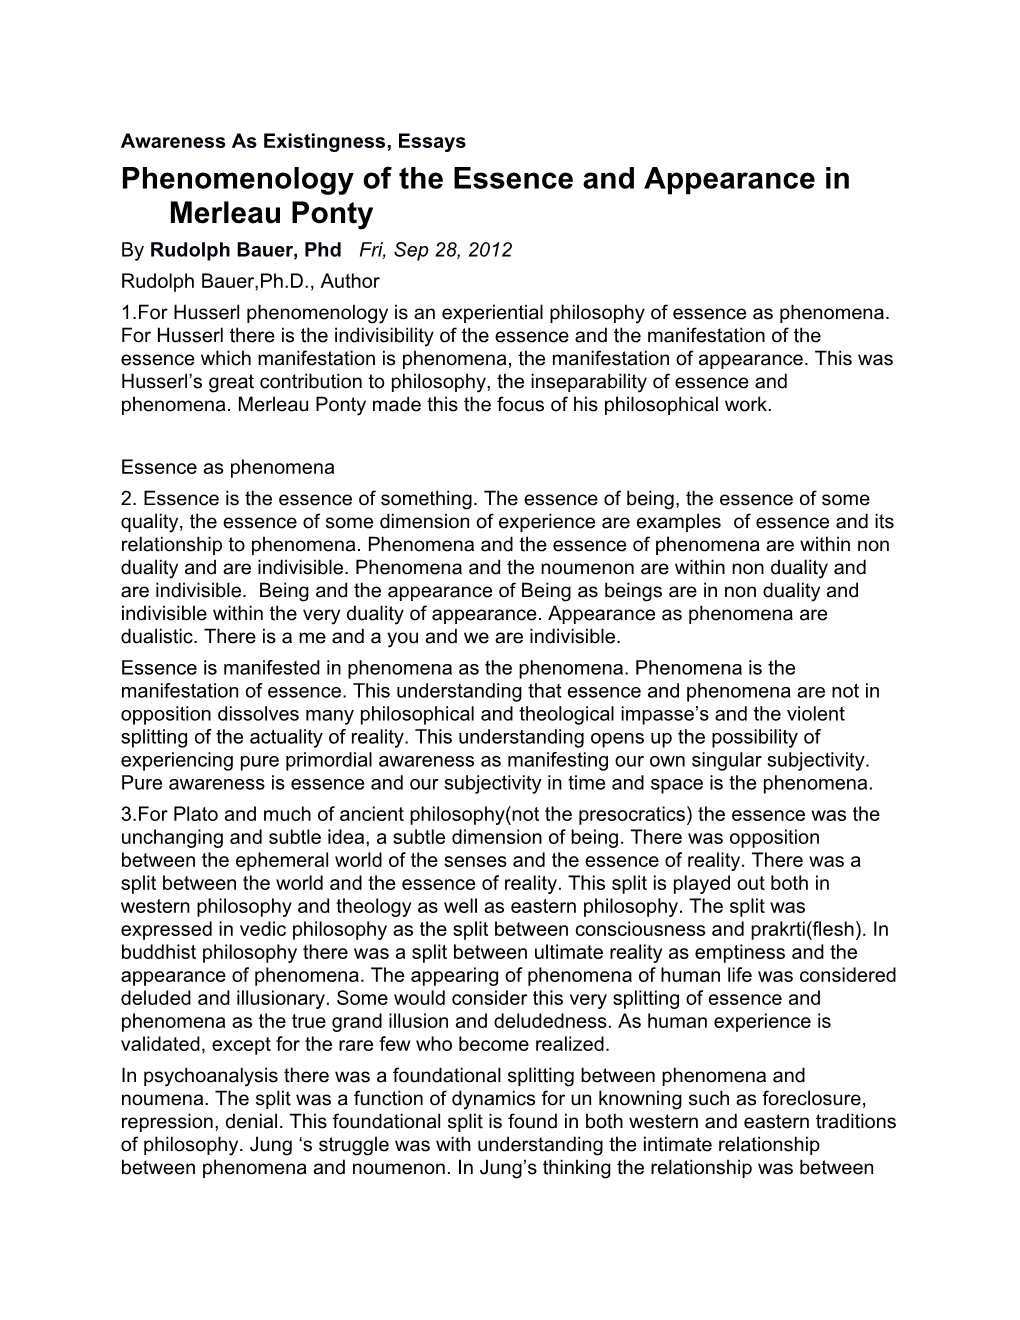 Phenomenology of the Essence and Appearance in Merleau Ponty